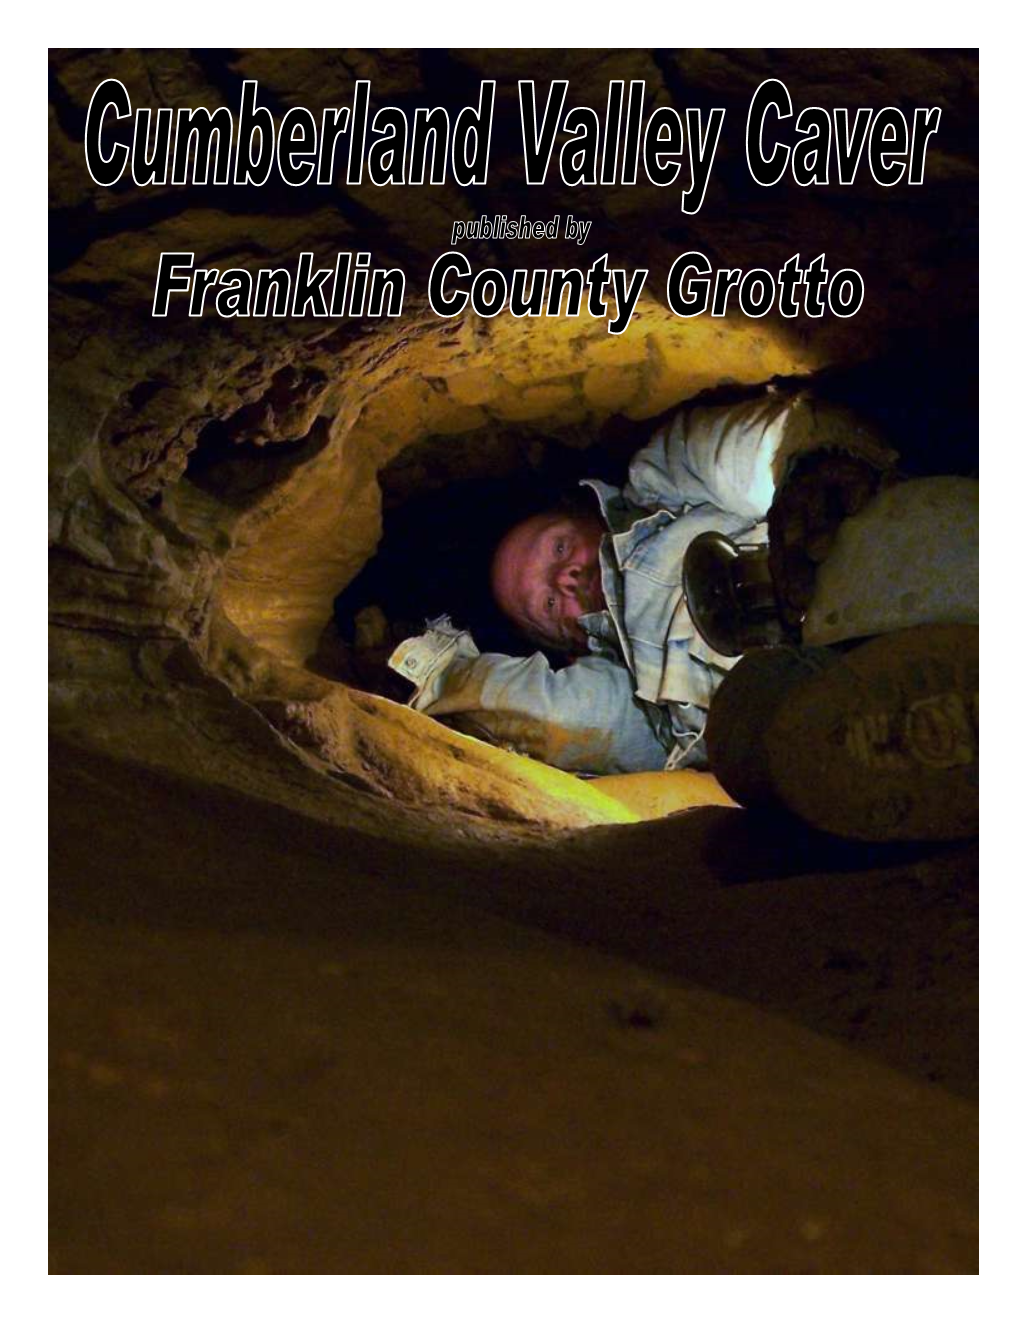 CUMBERLAND VALLEY CAVER Published by FRANKLIN COUNTY GROTTO an Affiliate of the National Speleological Society